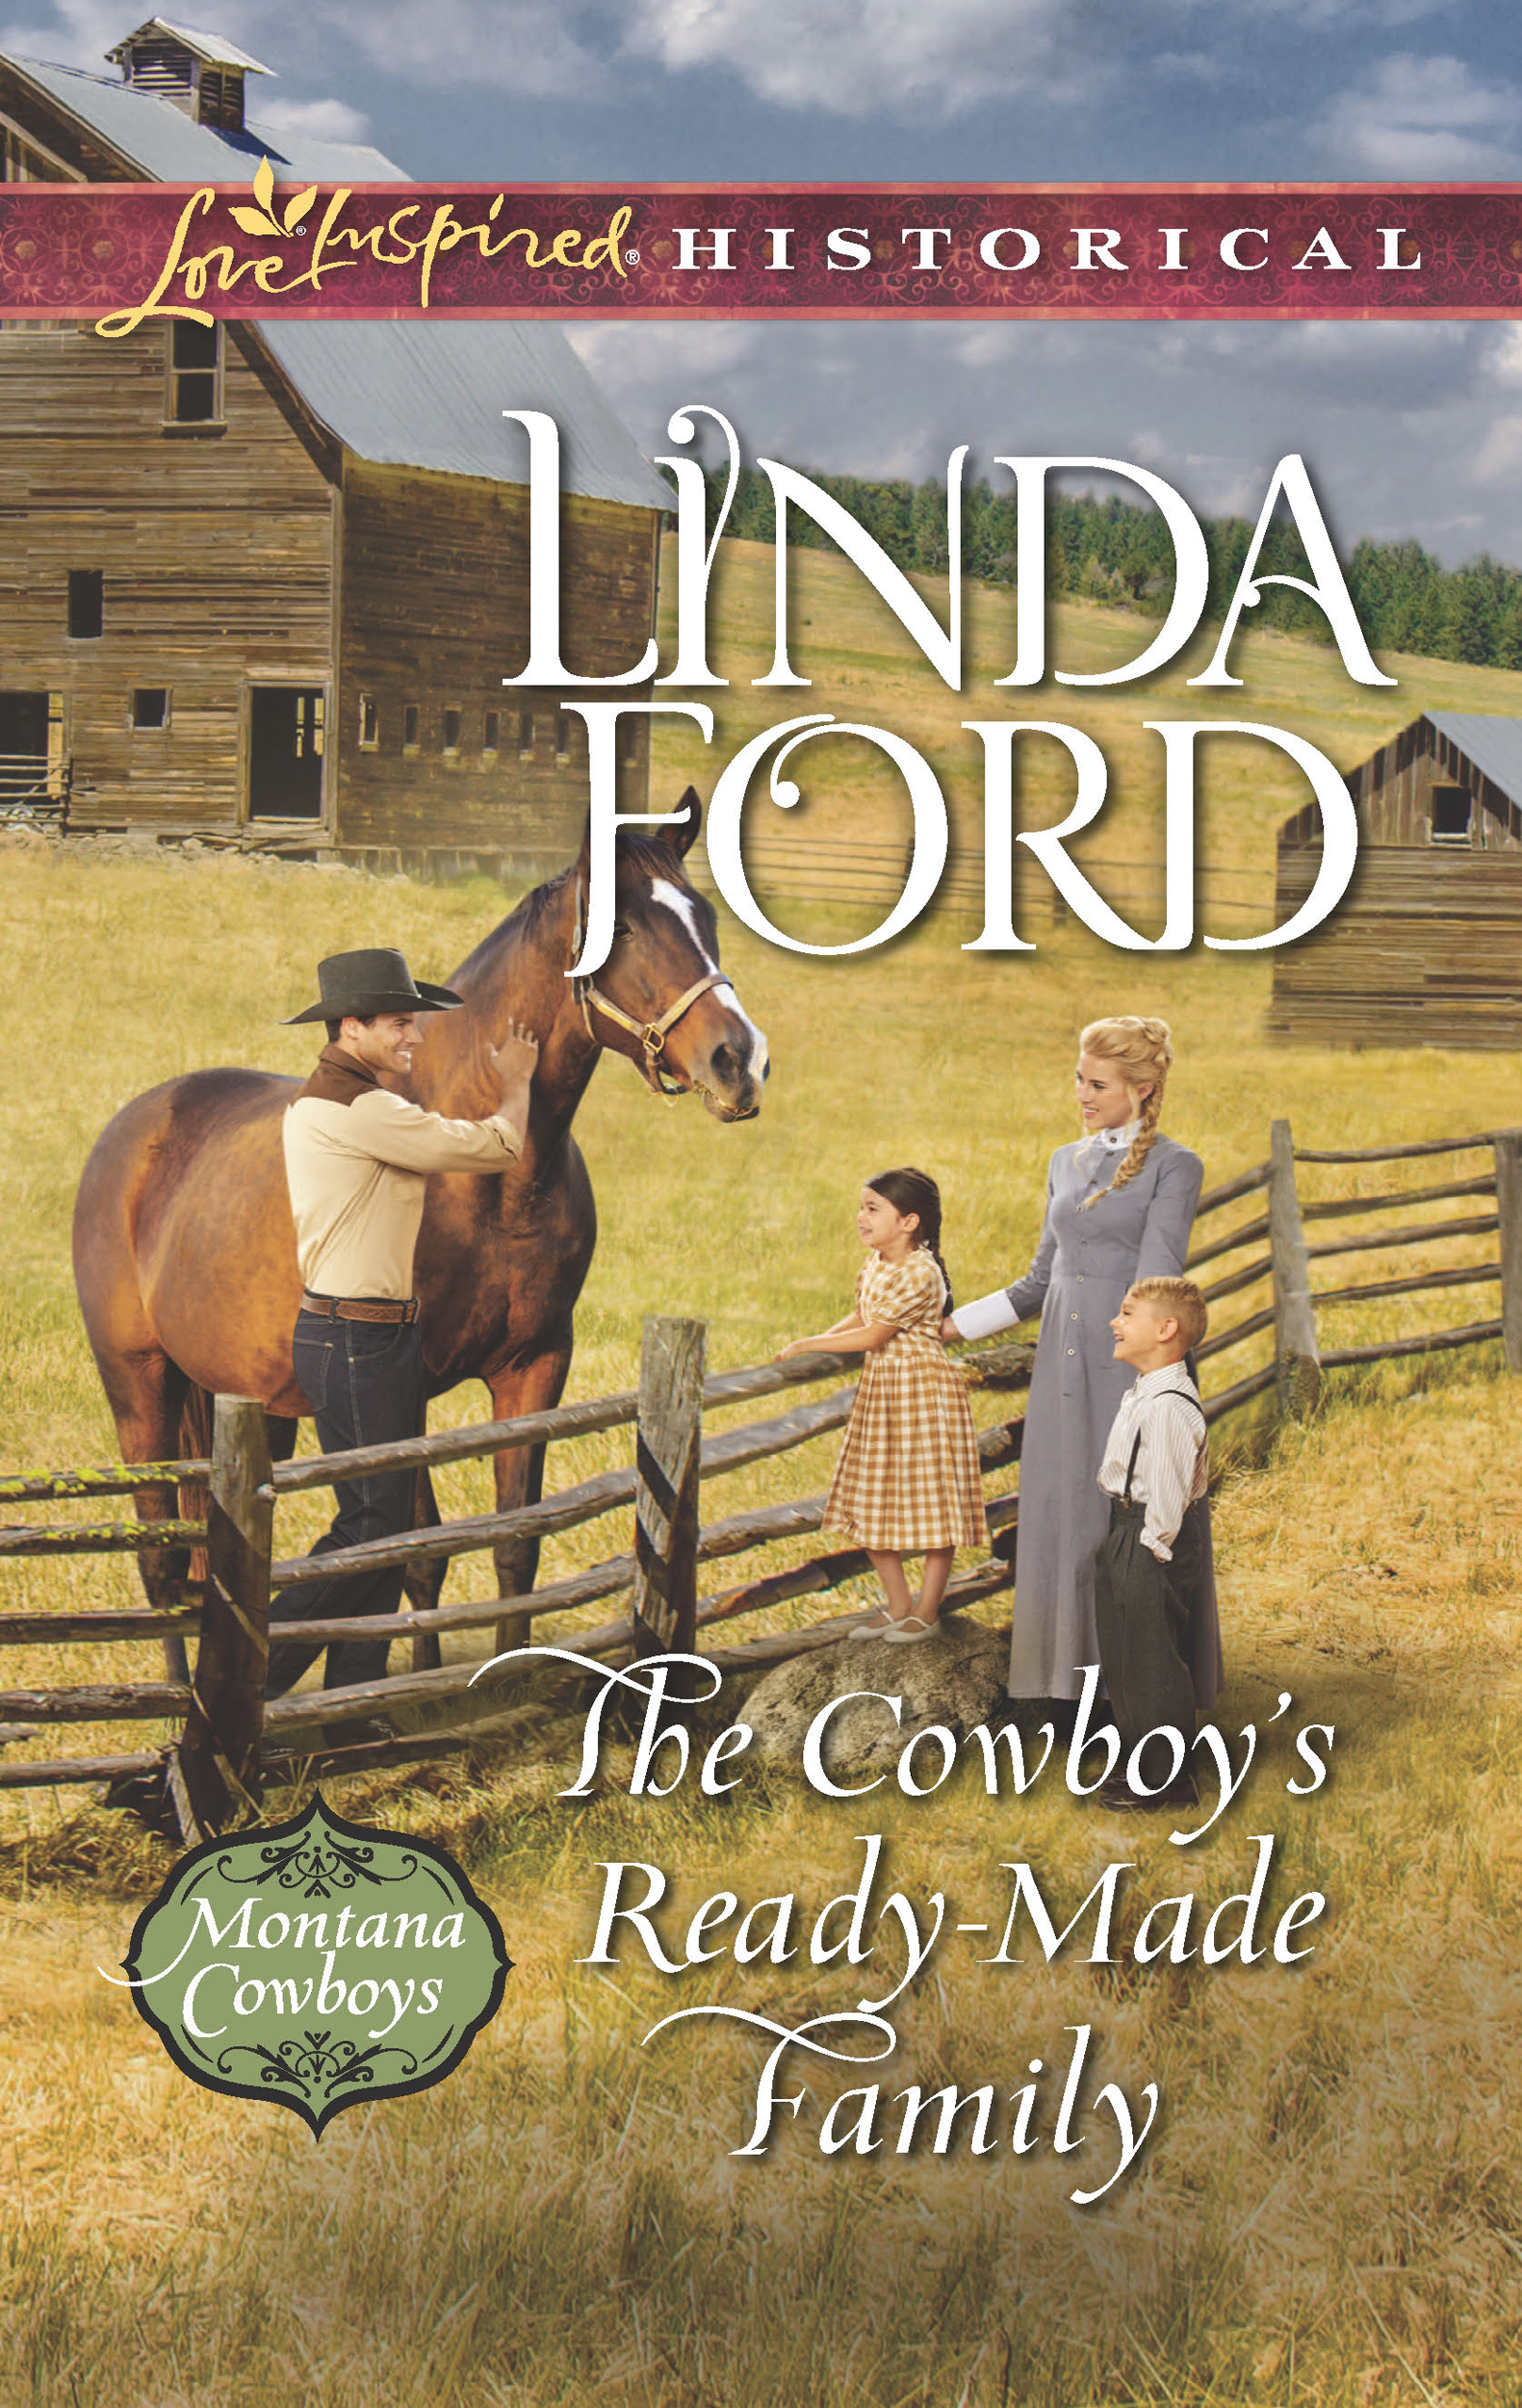 The Cowboy's Ready-Made Family (2015) by Linda Ford